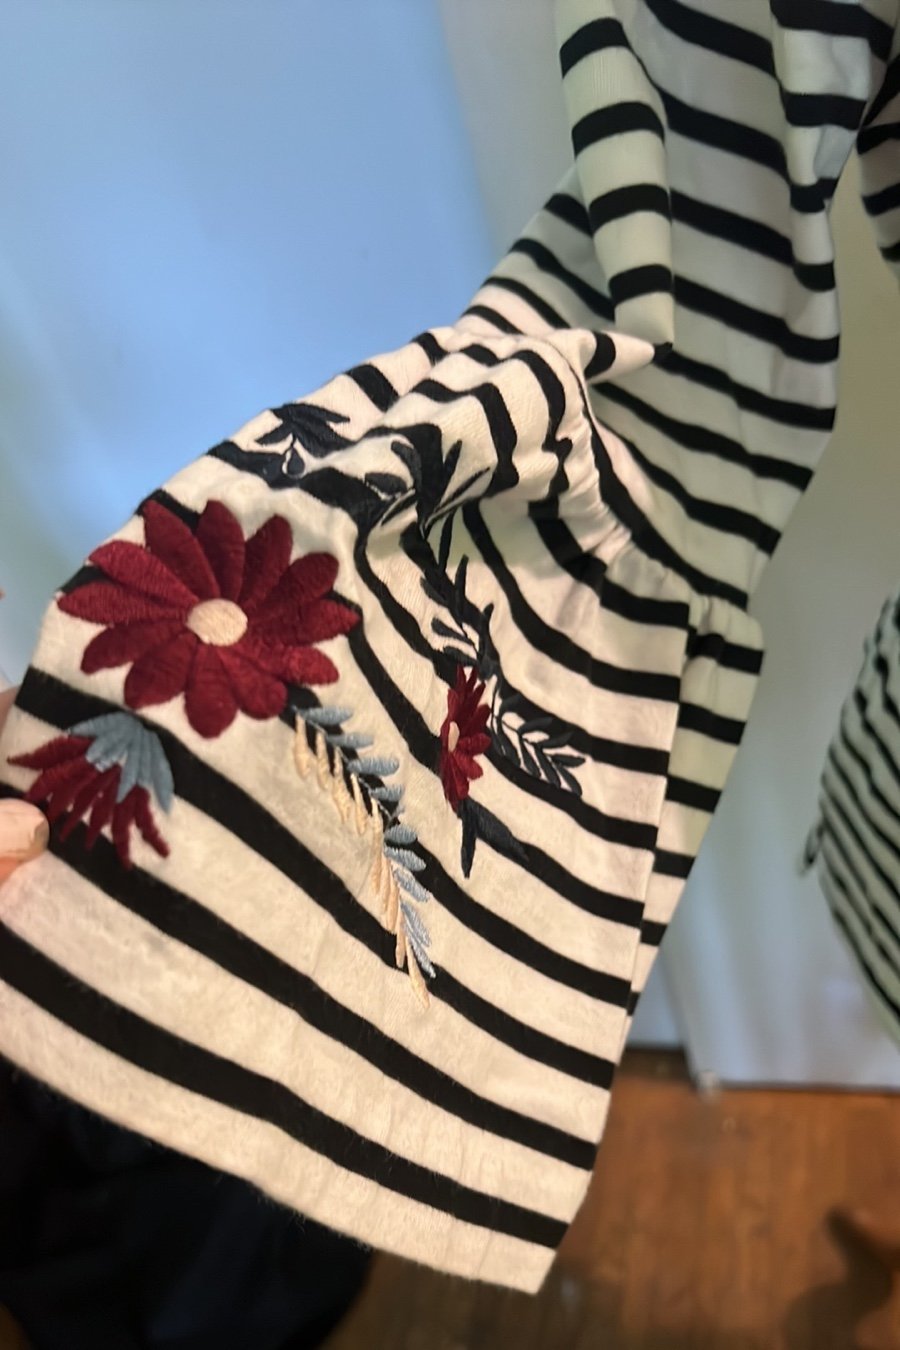 Simple J. Crew Med b&w Striped top with flowers HSO2lqlEV Low Price